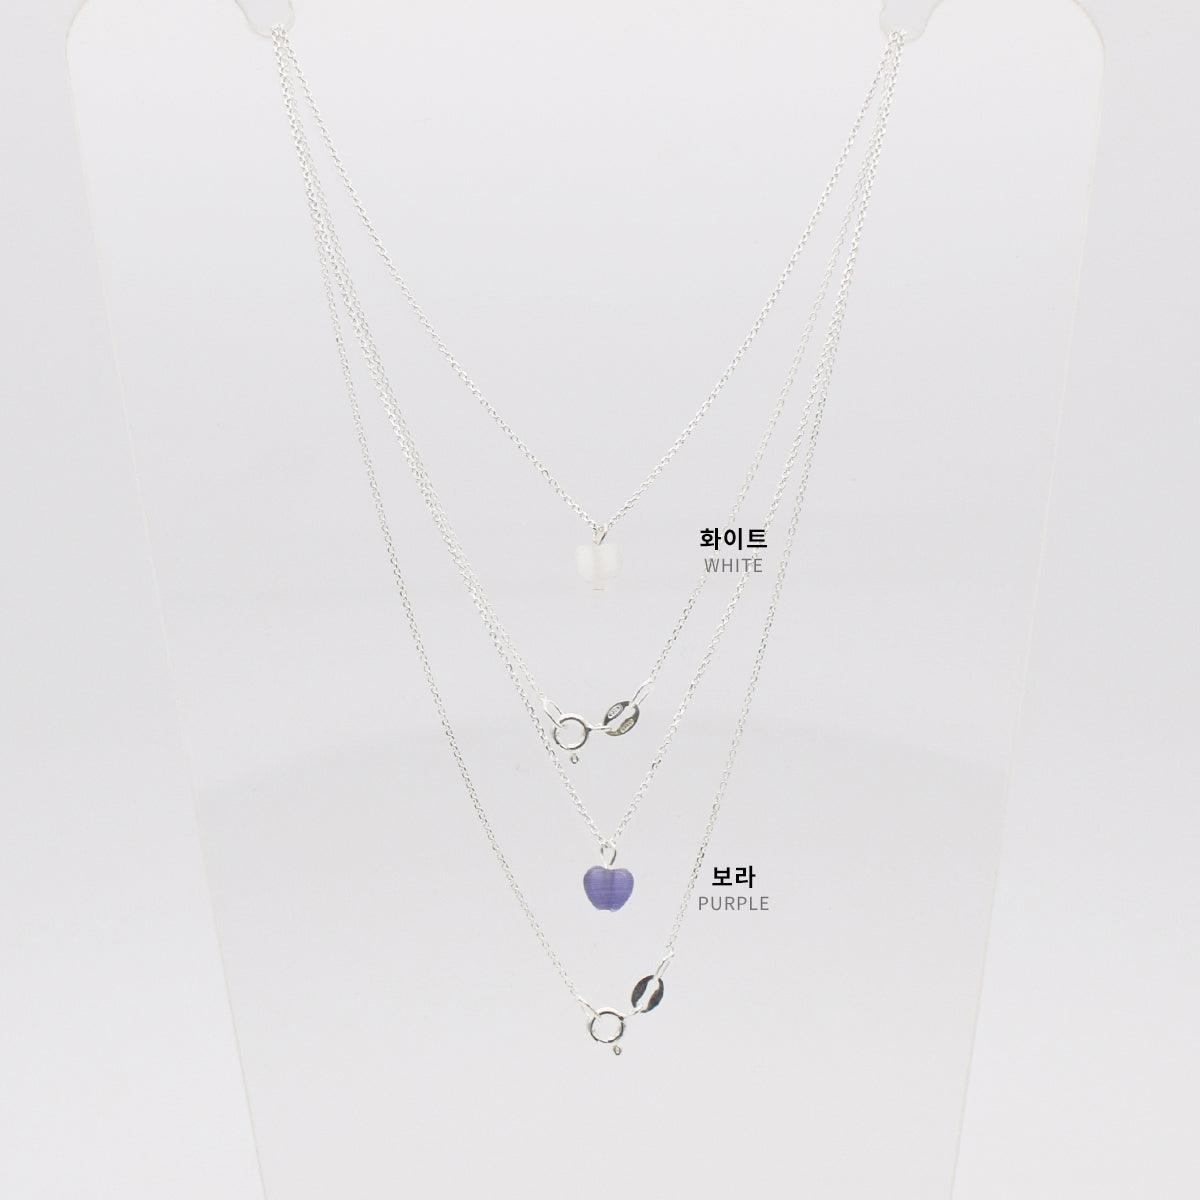 [925 Silver]原石アクアハートネックレス necklace 10000won 